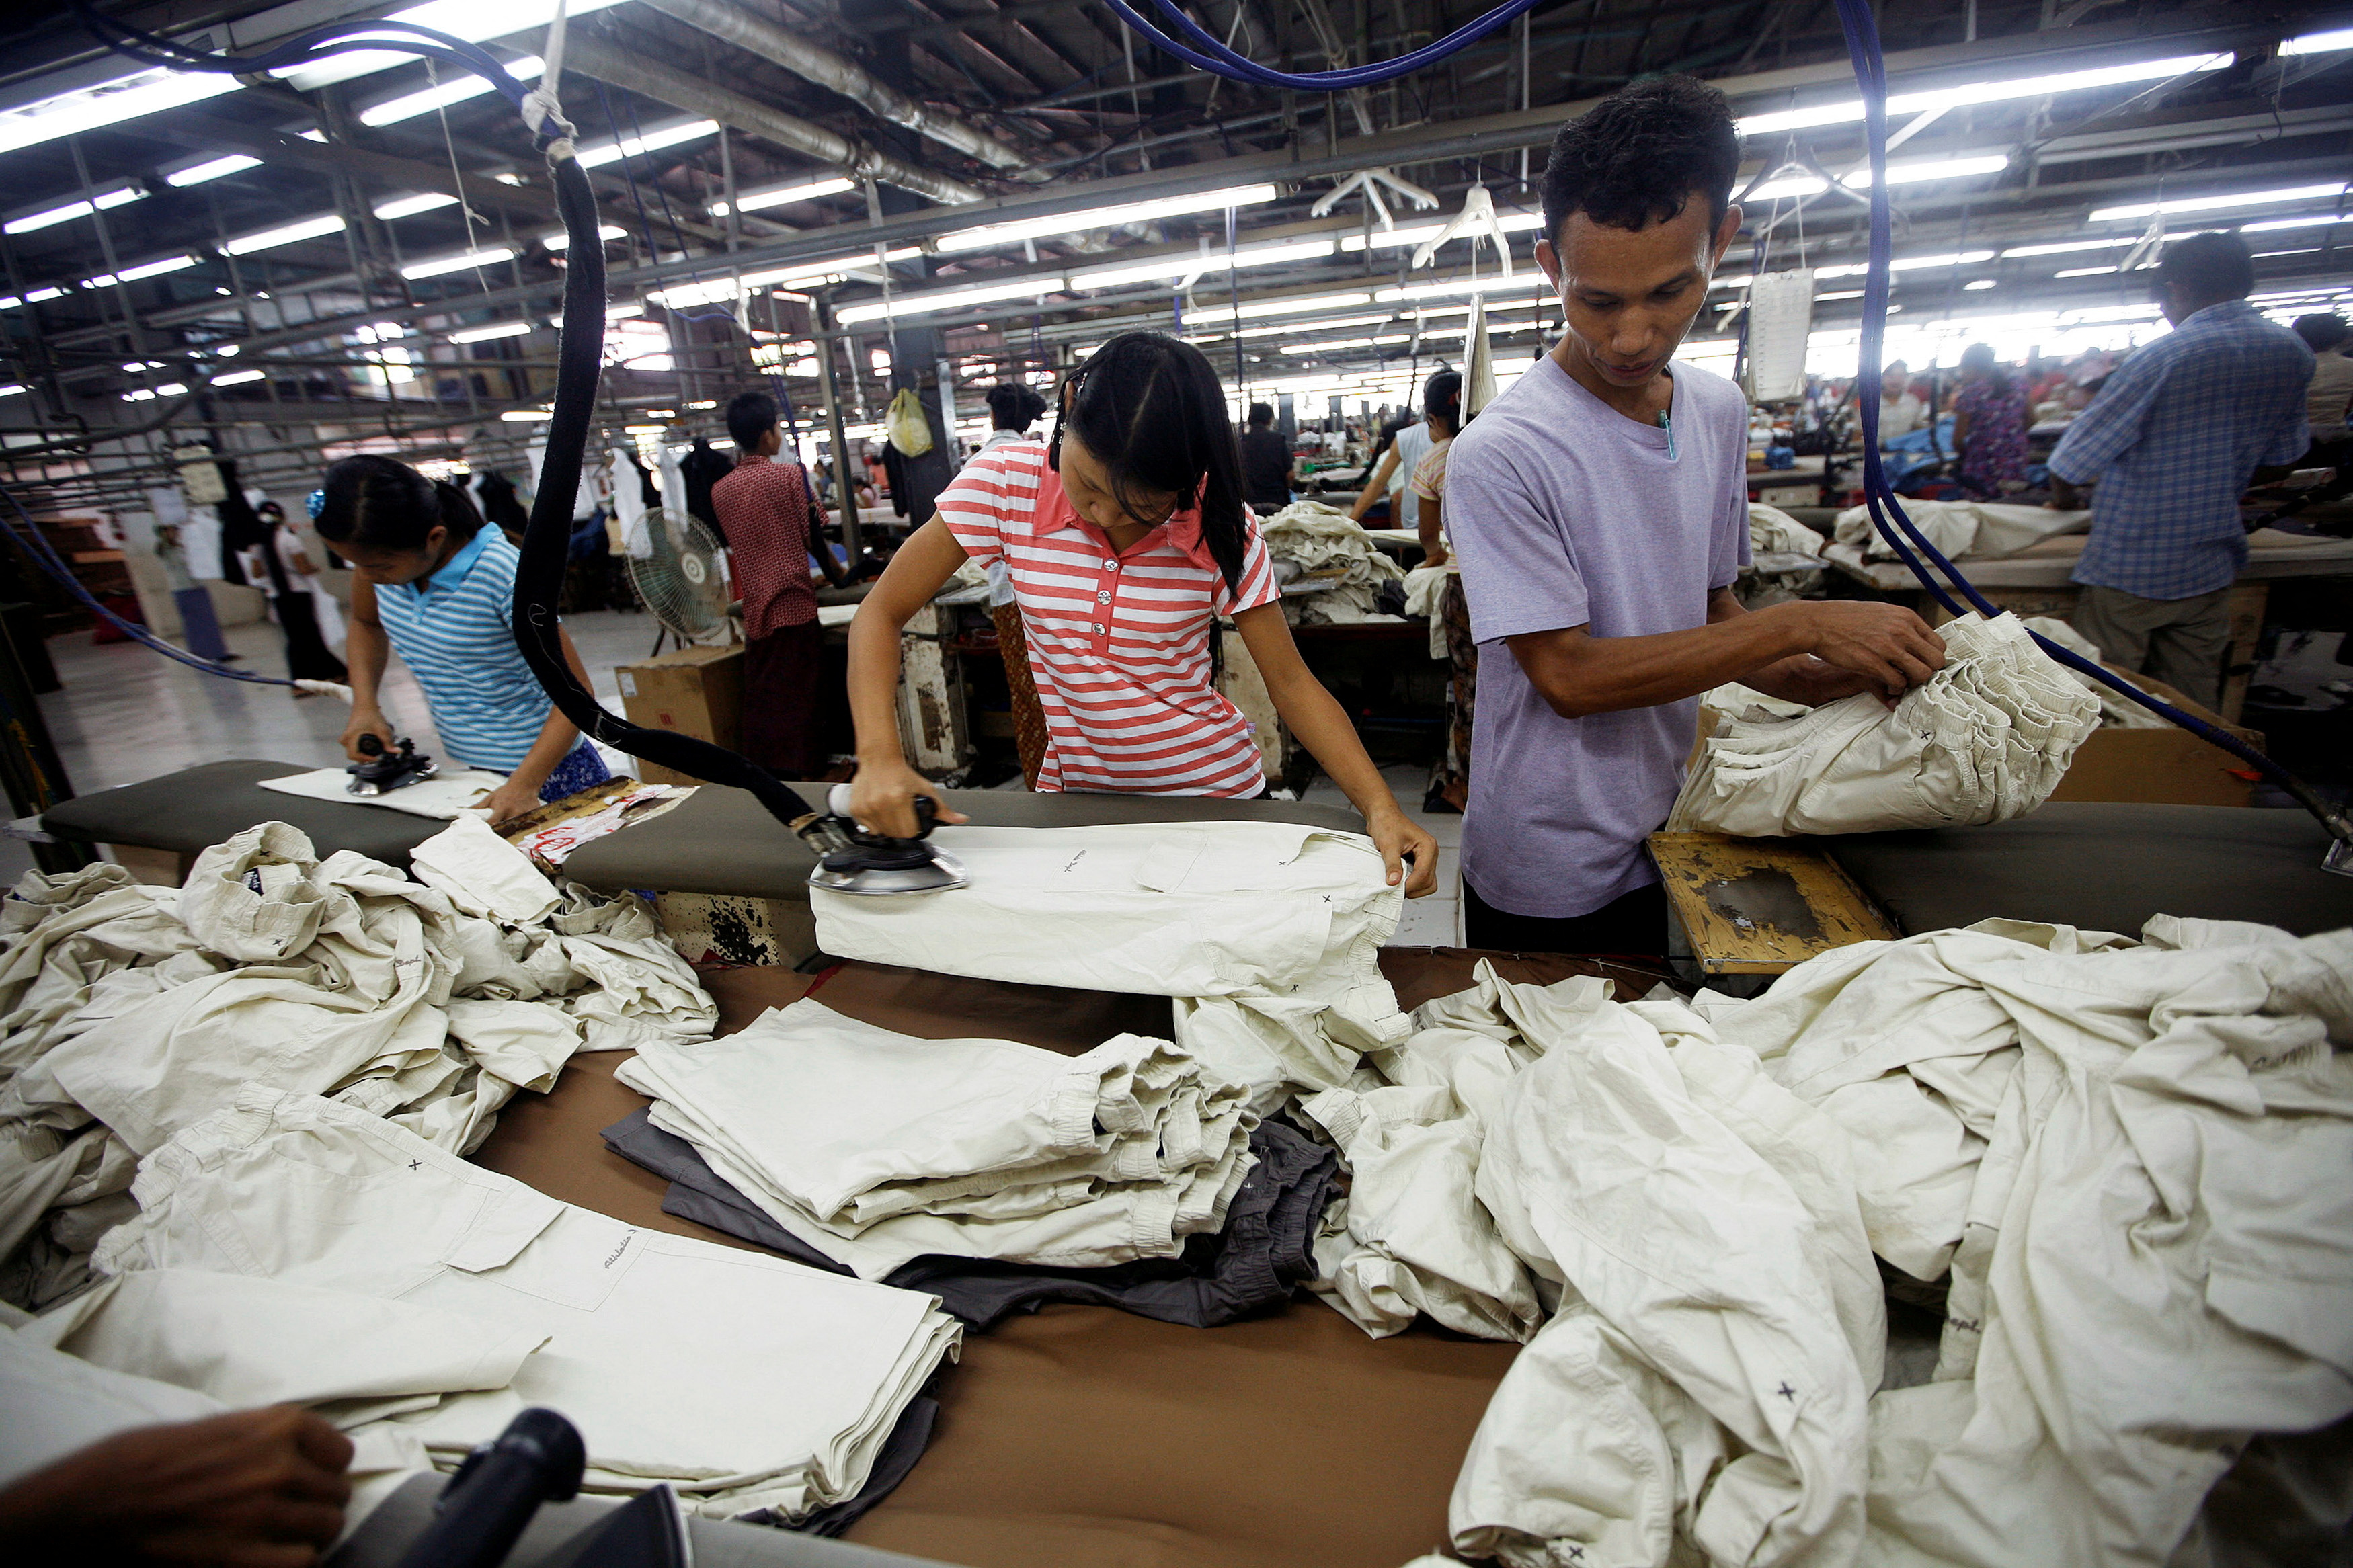 Workers iron and arrange clothing at a garment factory in Yangon